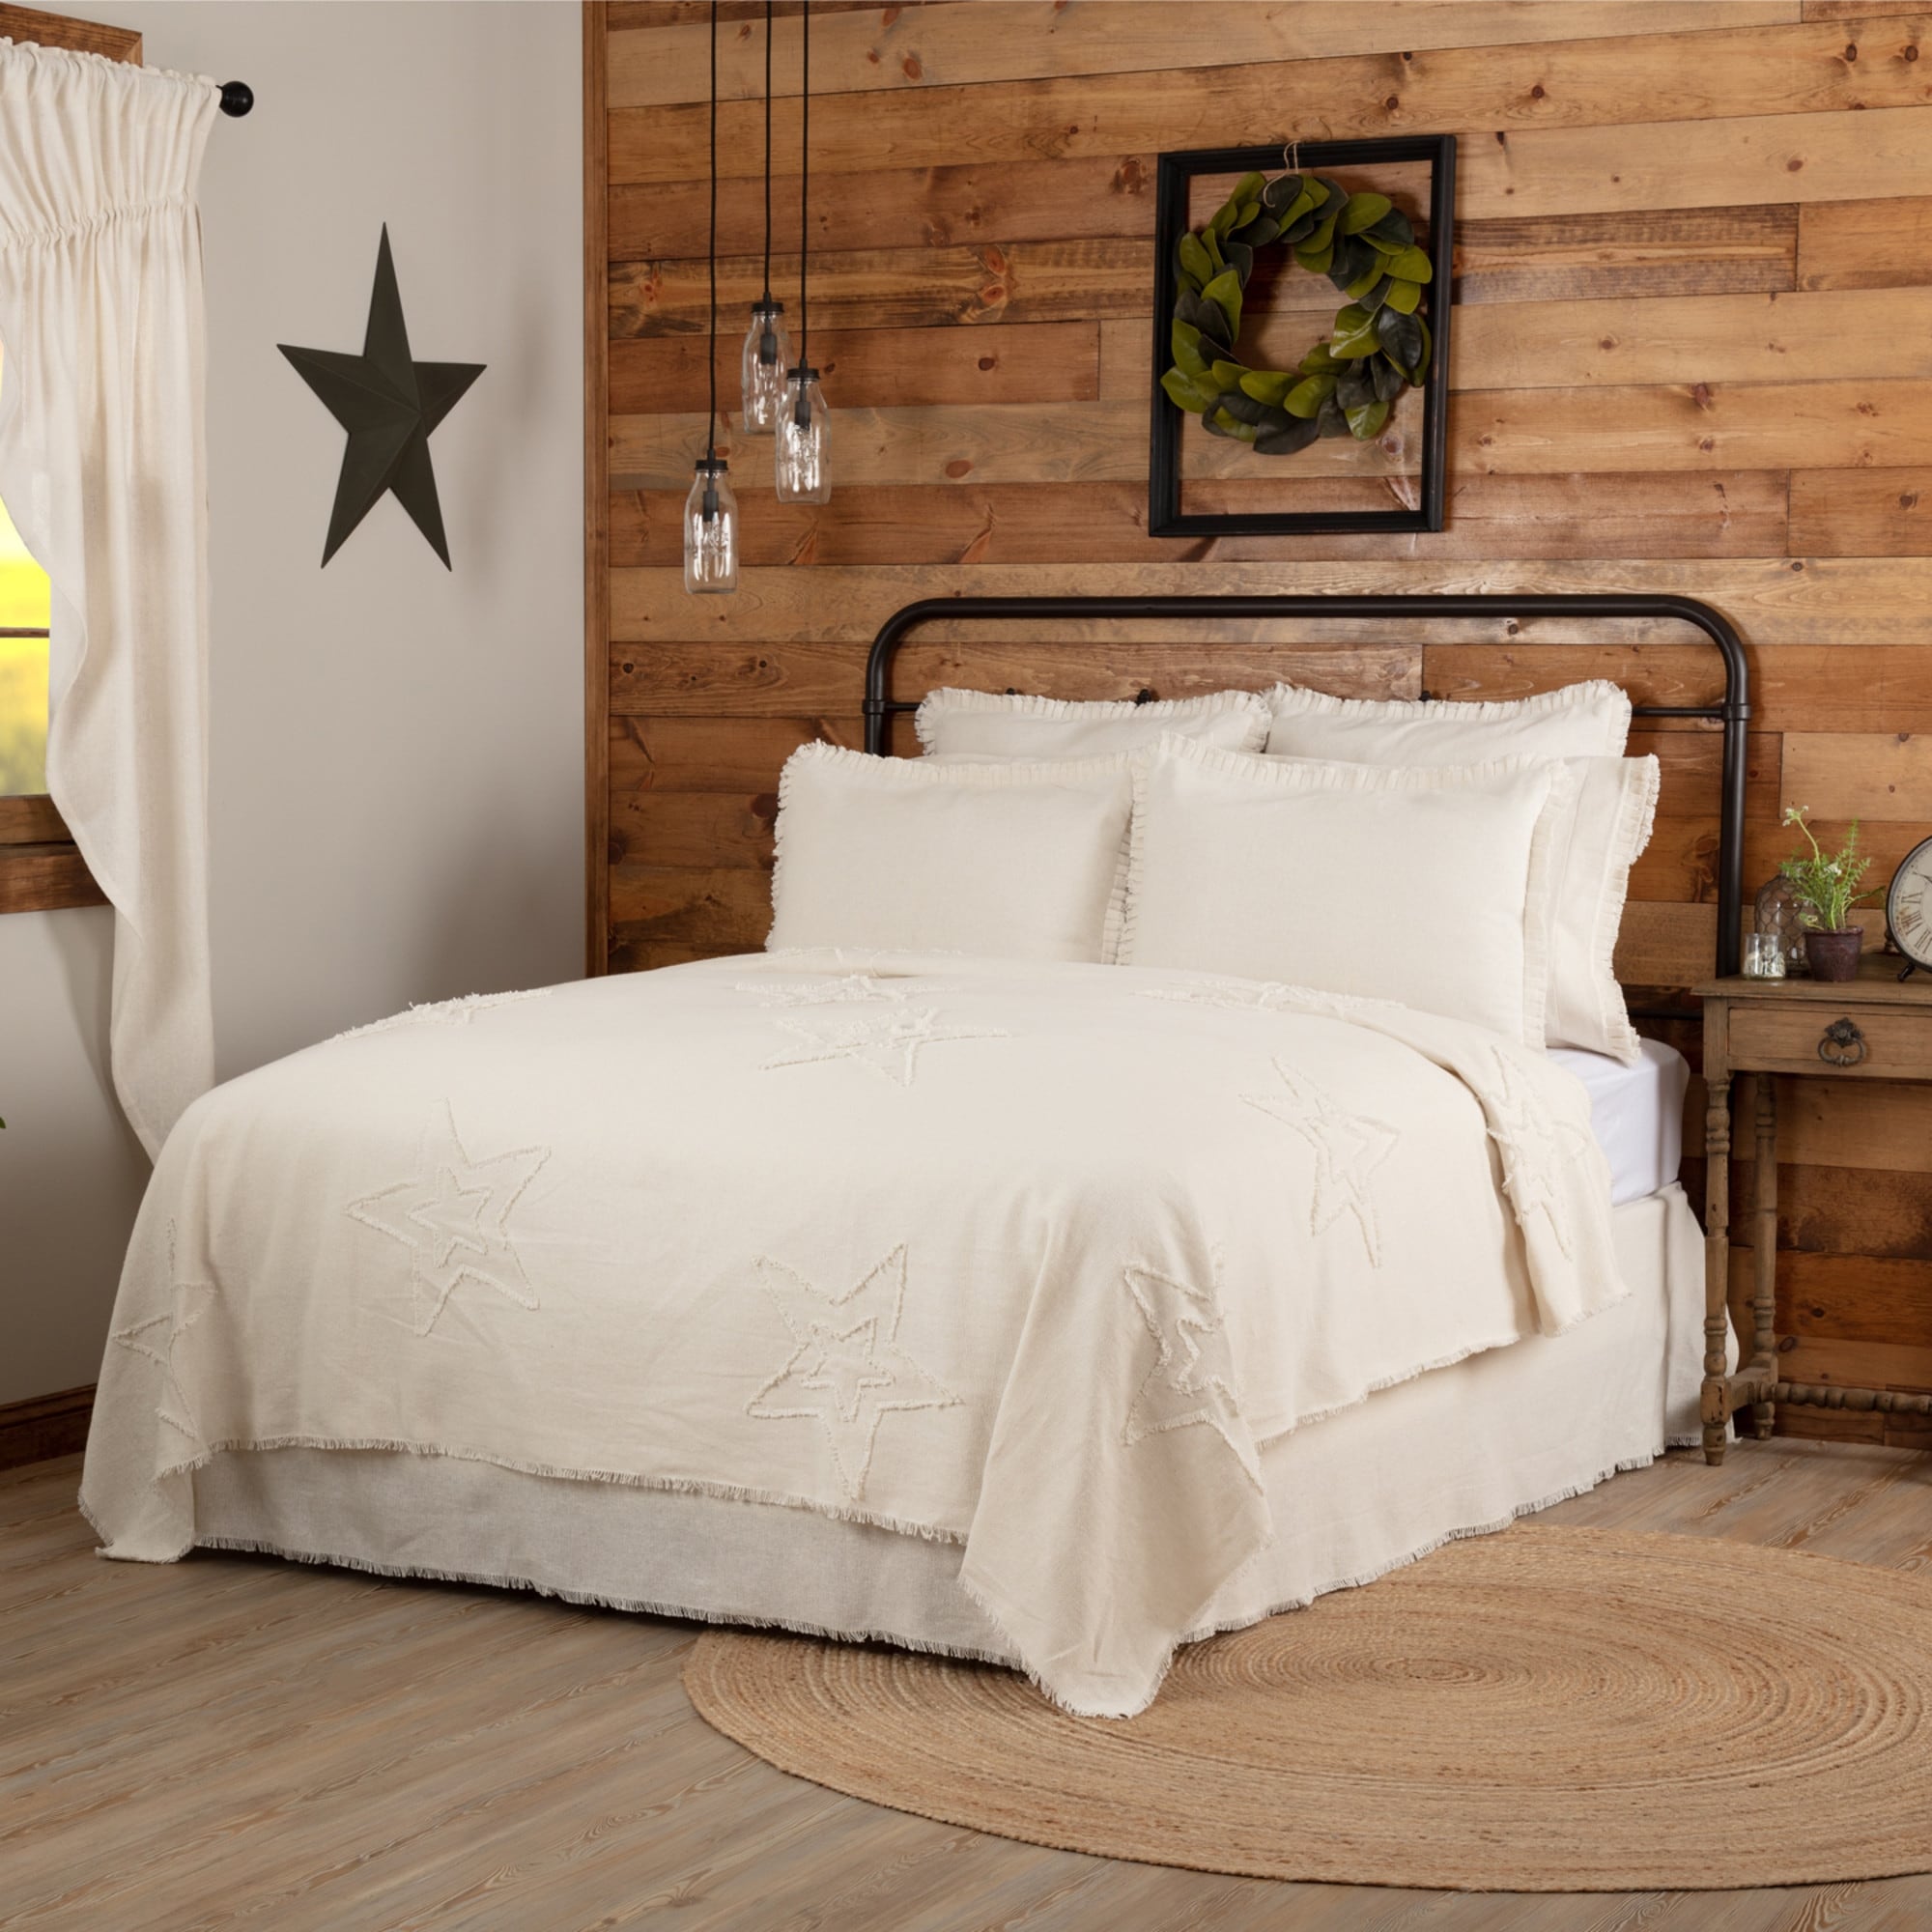 https://ak1.ostkcdn.com/images/products/is/images/direct/e66b83280c9e6c6b637b0b61b96797e57e554d06/Farmhouse-Bedding-VHC-Cotton-Burlap-Star-Coverlet-Distressed-Appearance.jpg